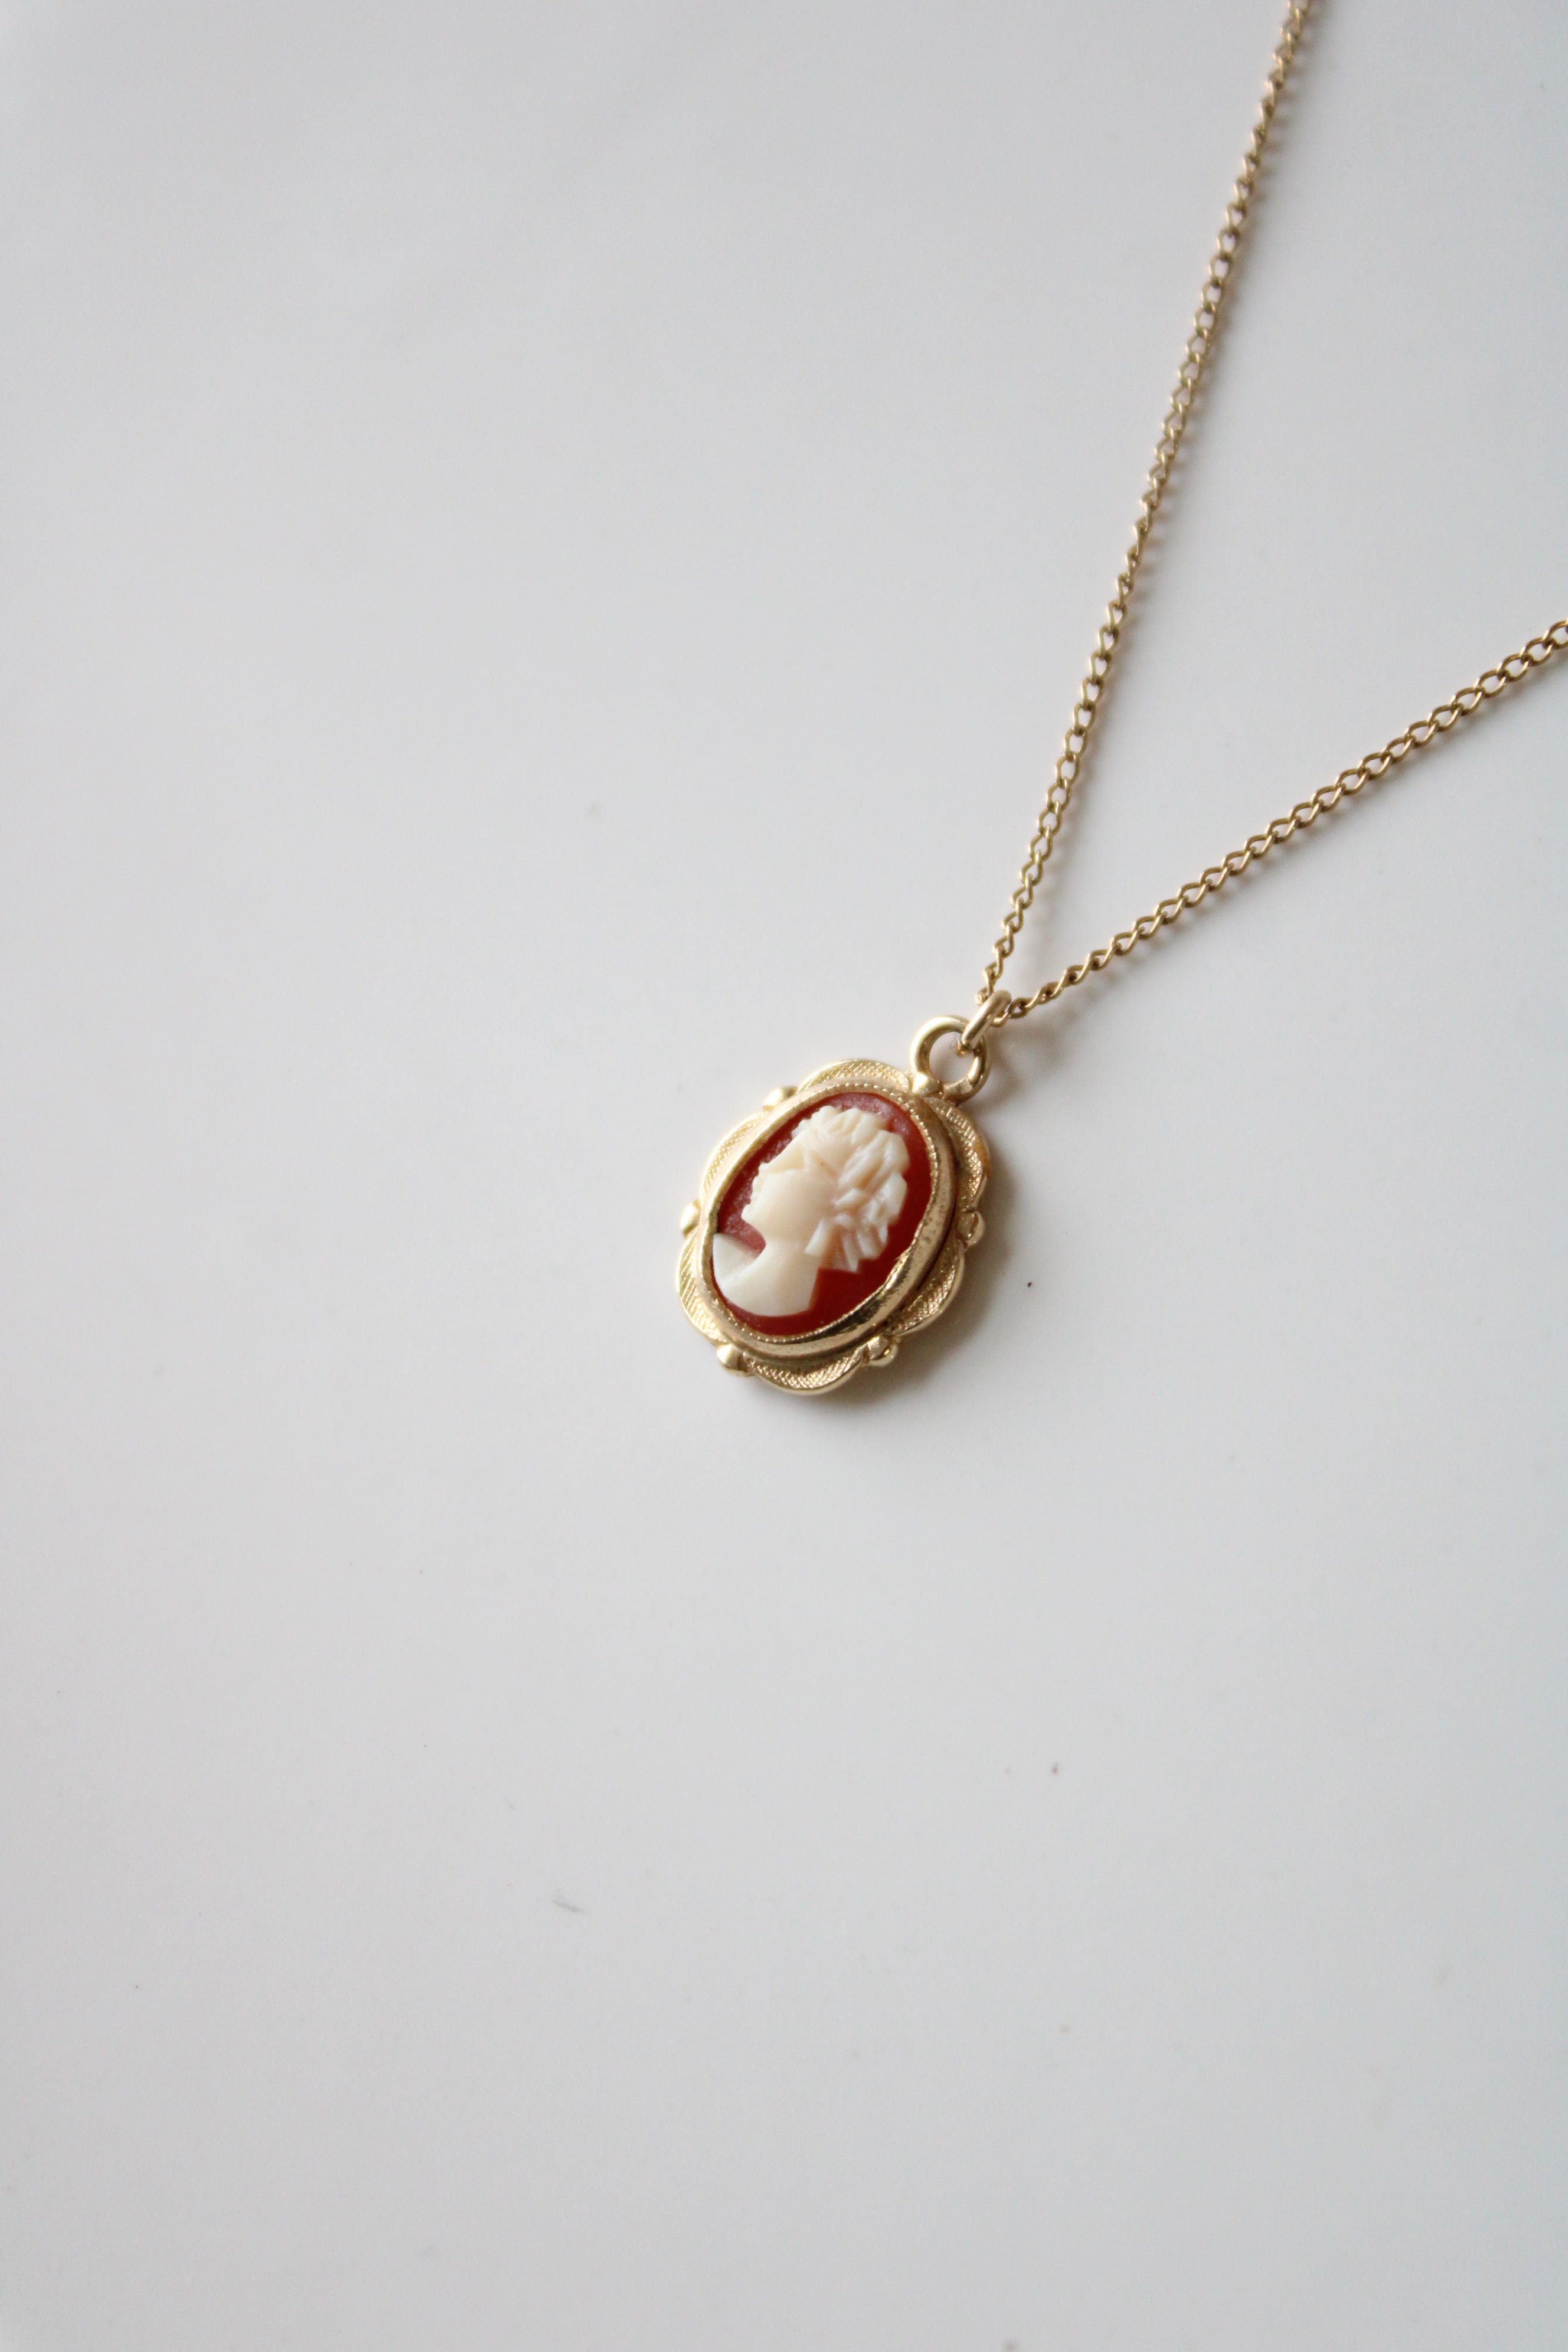 Vintage 14KT Yellow Gold Pink Cameo Necklace